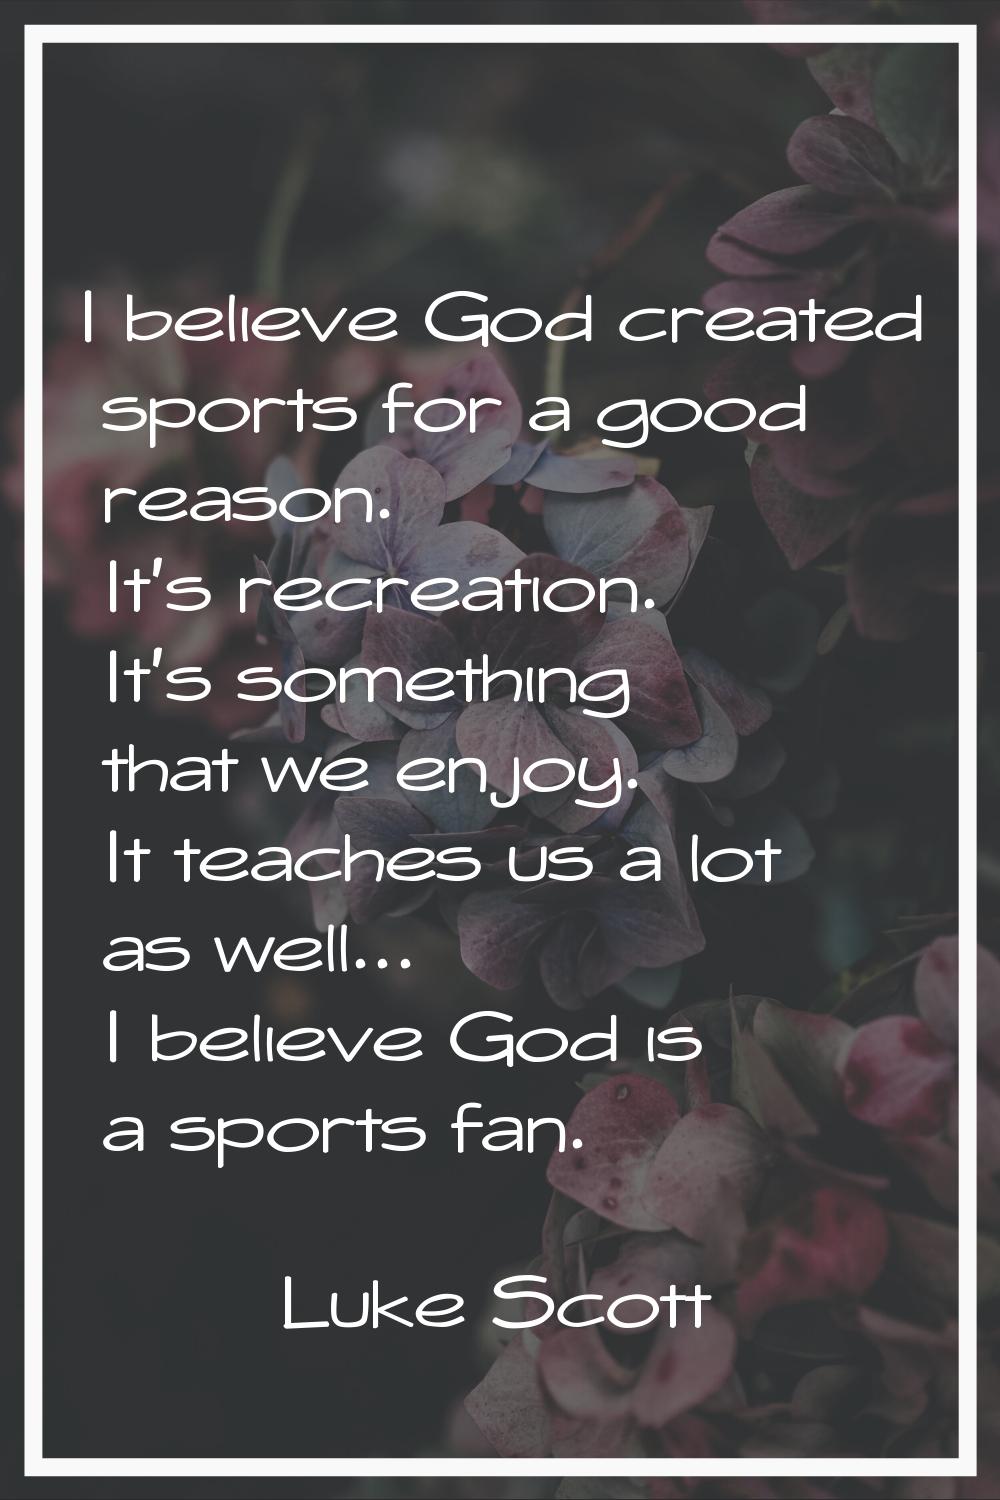 I believe God created sports for a good reason. It's recreation. It's something that we enjoy. It t